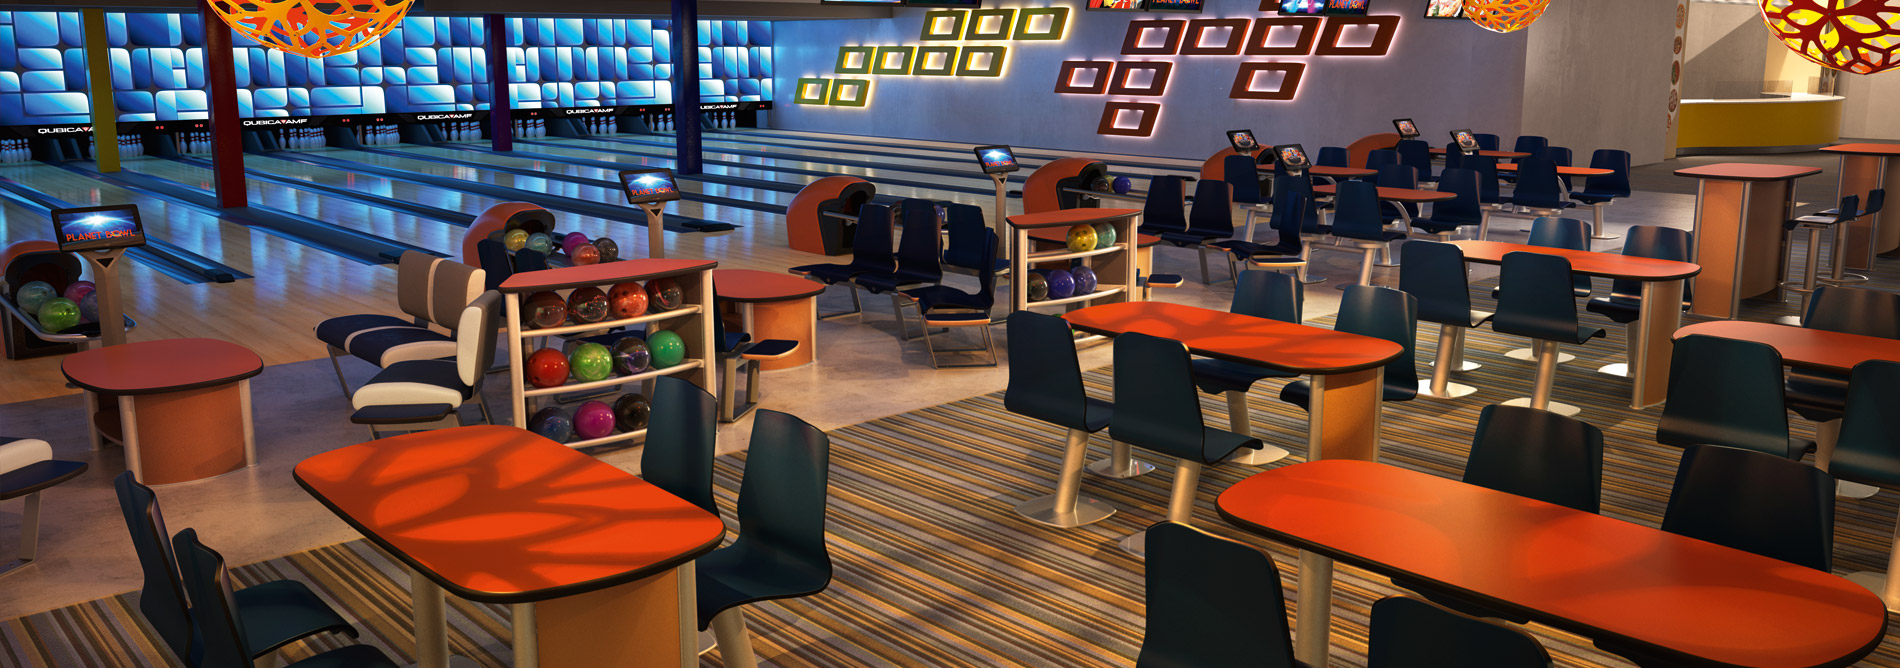 Bowling-QubicaAMF-furniture-harmony-energy-banner2.jpg